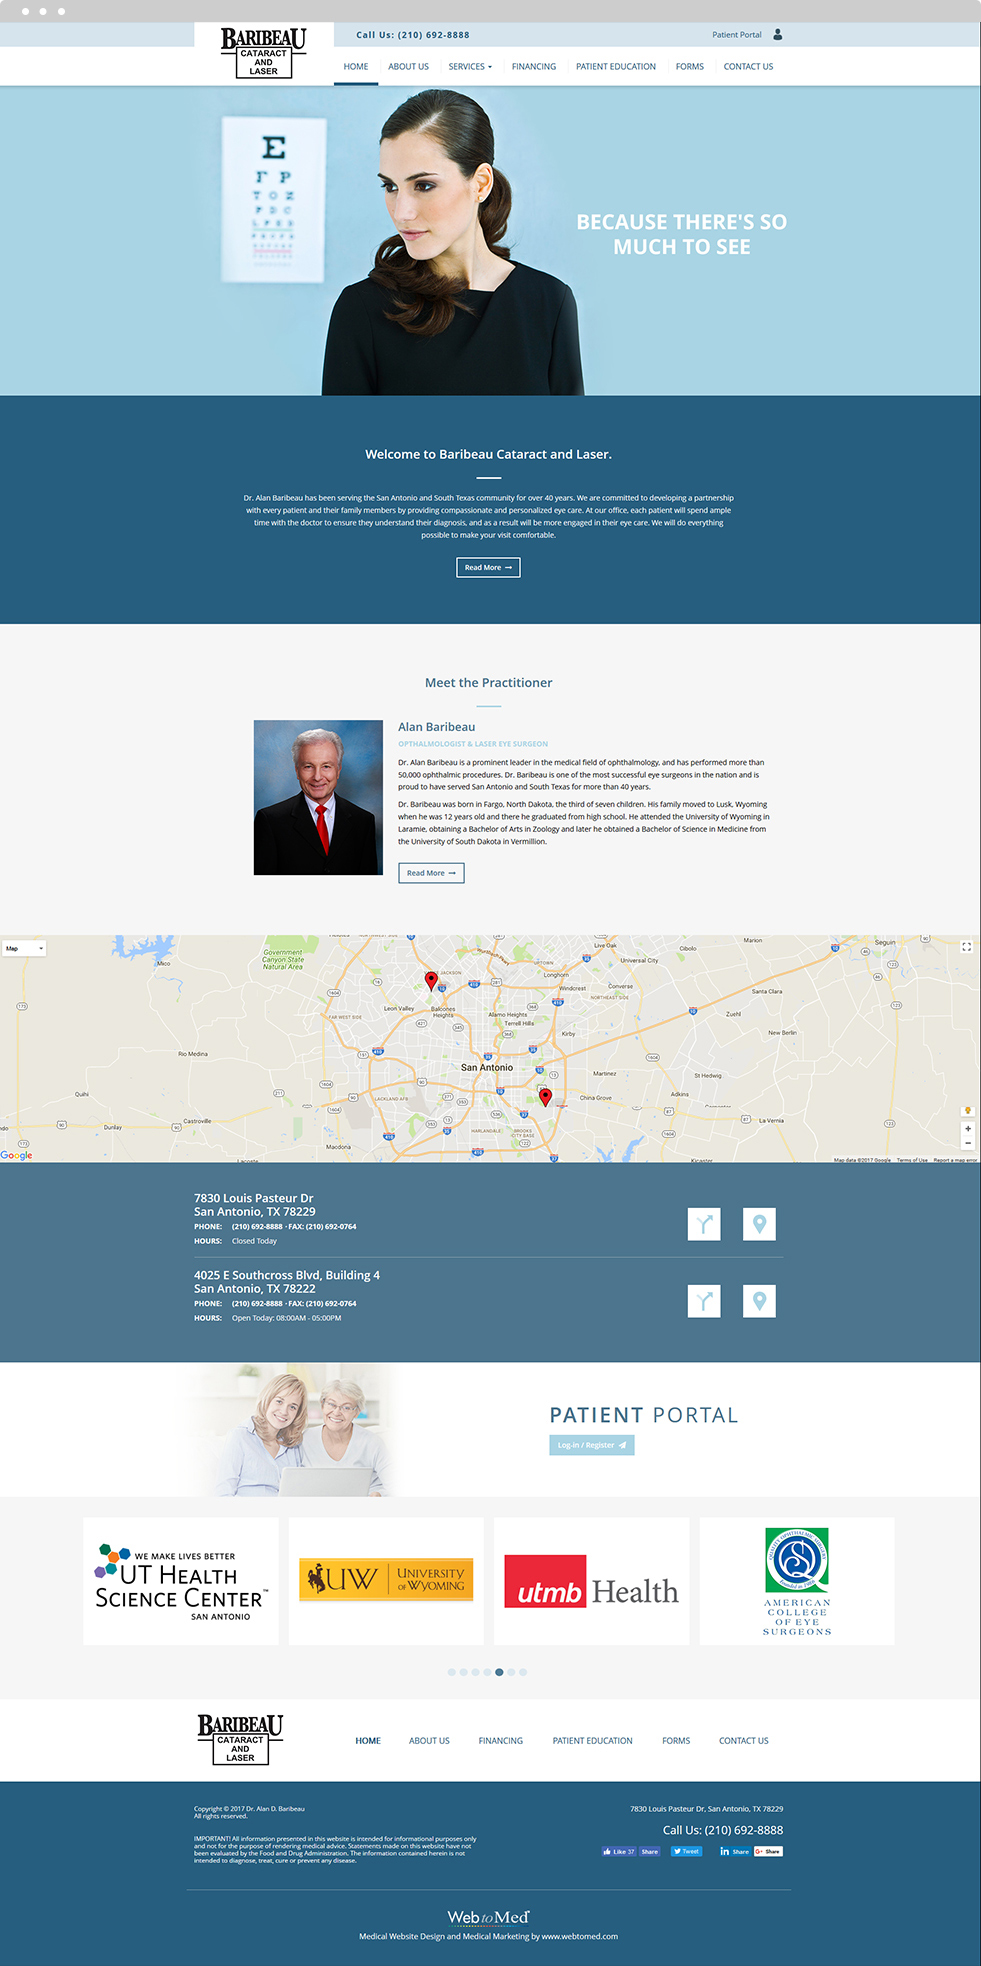 Ophthalmology Website Design - Baribeau Cataract and Laser - Homepage